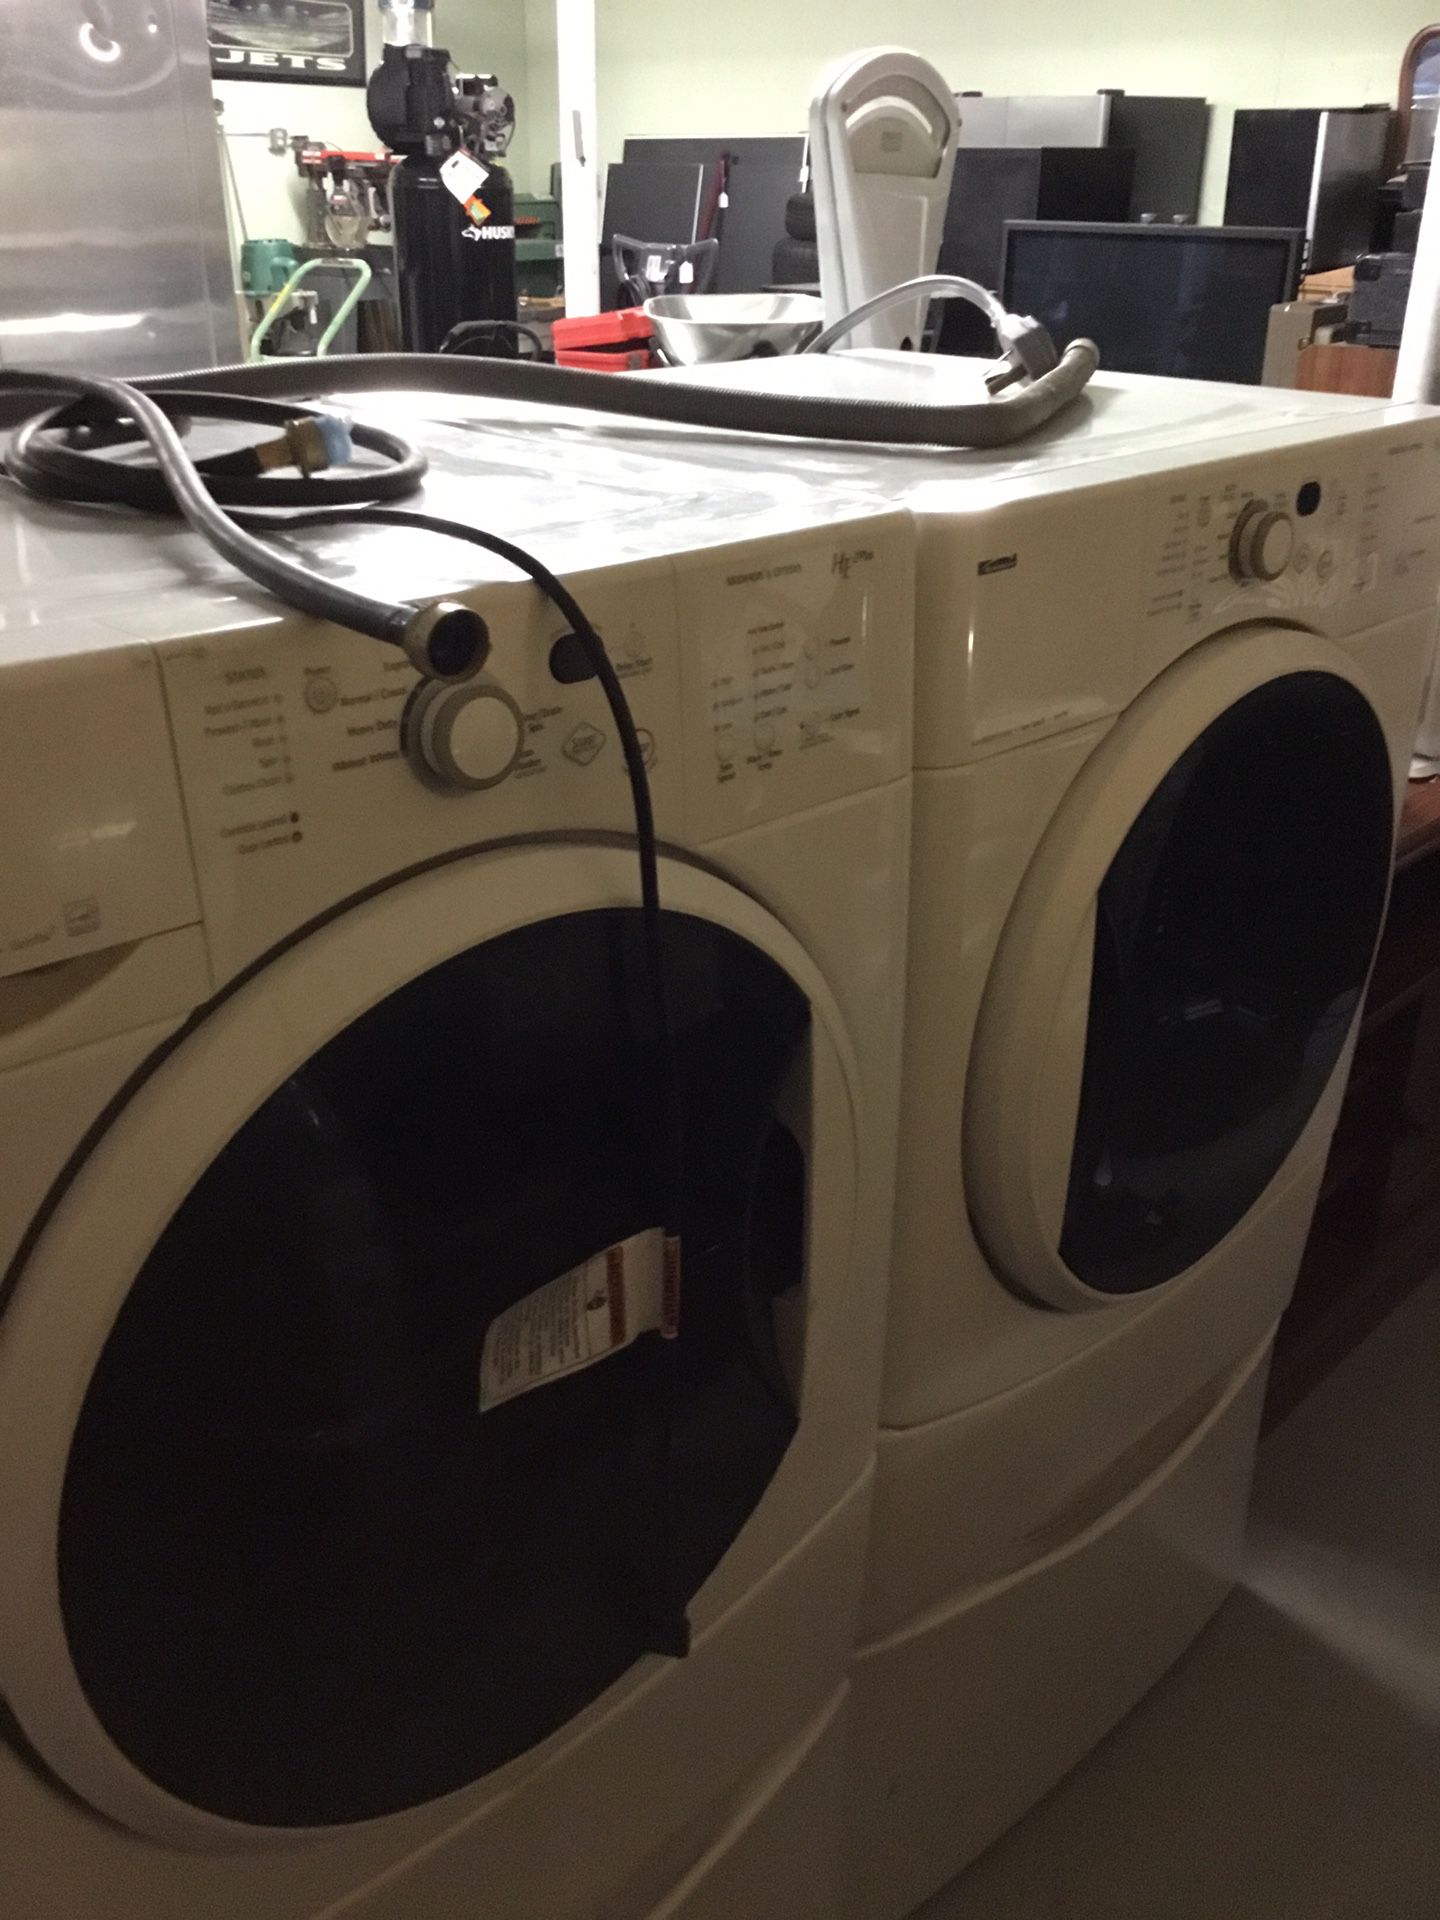 H2 Plus washer and dryer